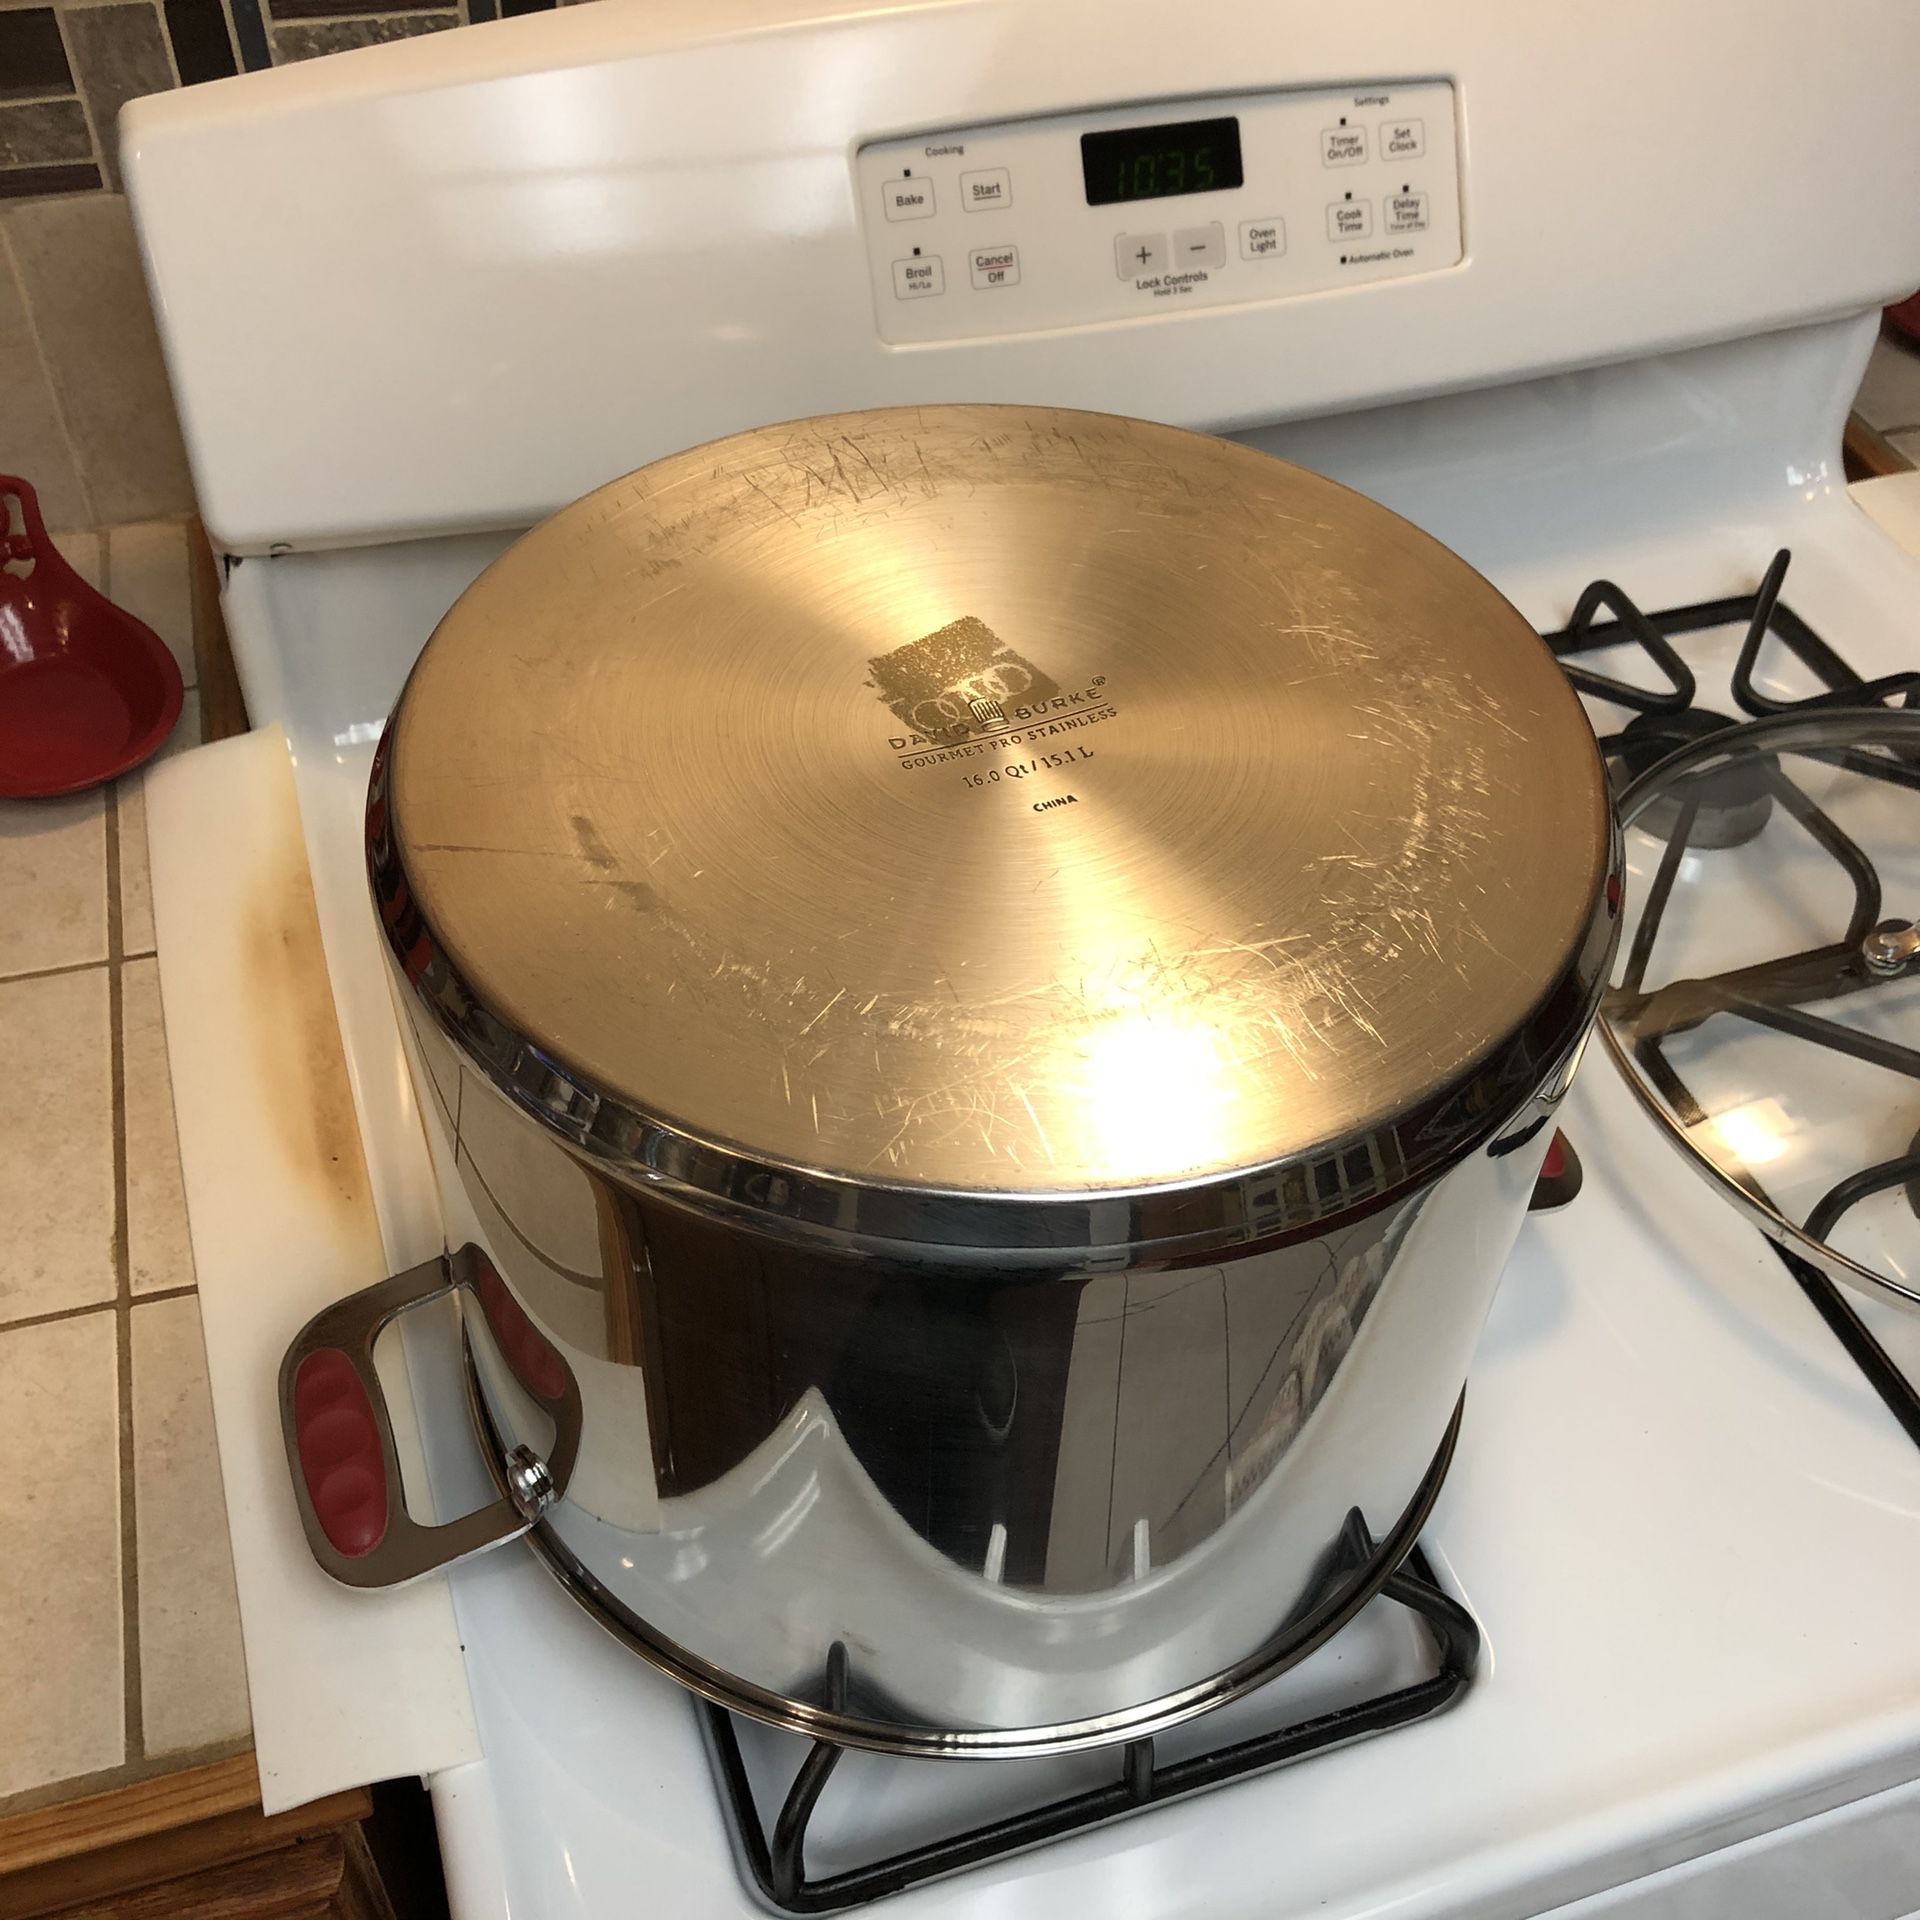 David Burke 16qt Stock Pot for Sale in Phillips Ranch, CA - OfferUp